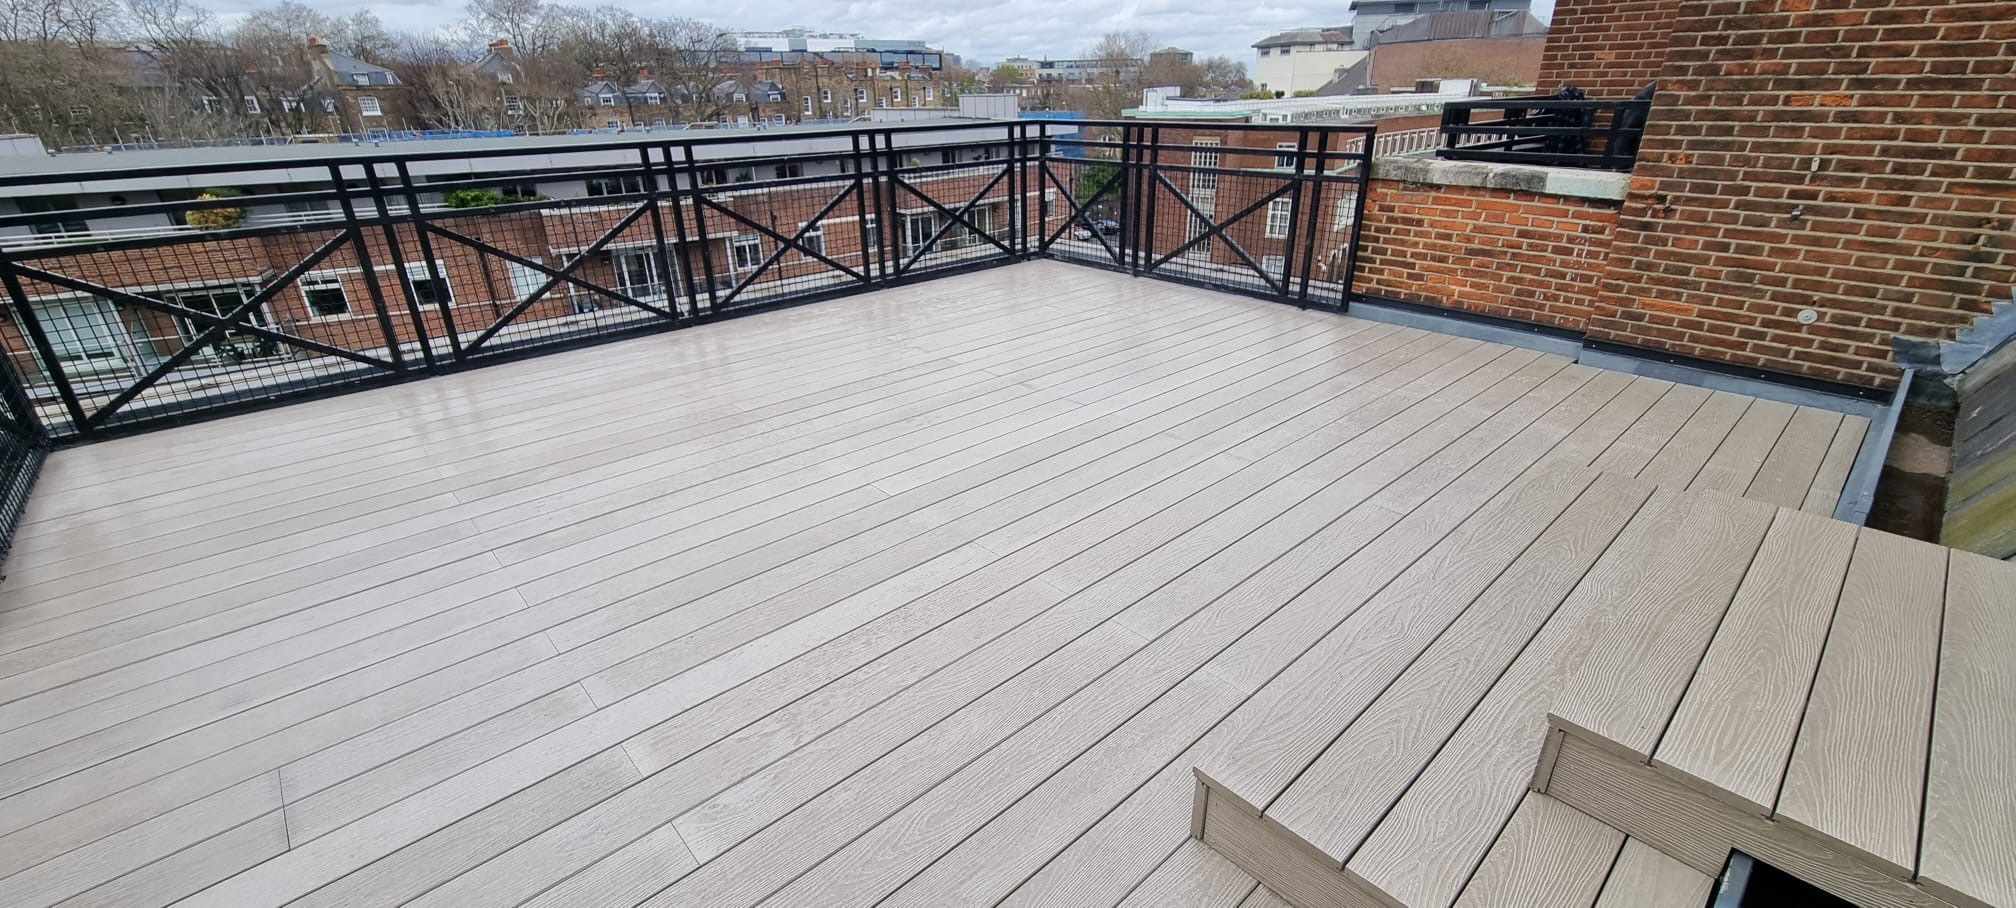 Alfresco Floors - fire-rated decking - A1 rated